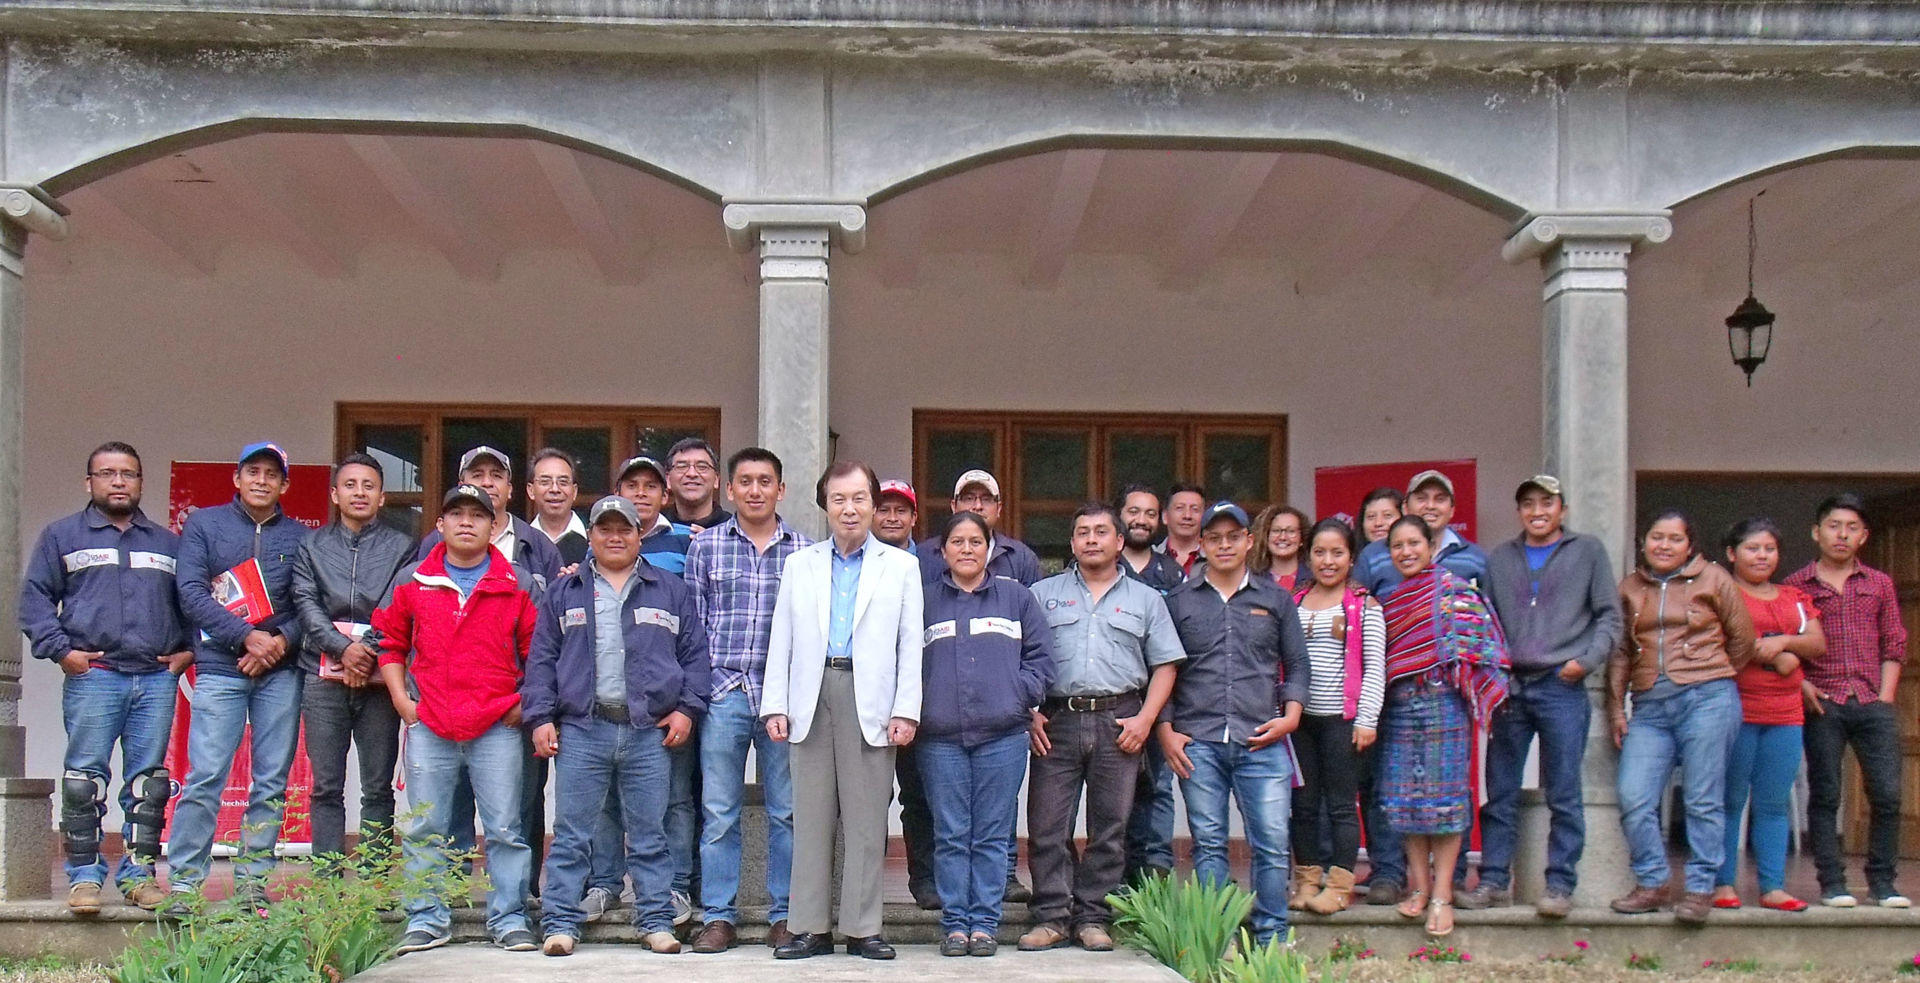 Dr. Young Park (center), professor of food science at Fort Valley State University, trained small goat farmers and staff about dairy goat production in Guatemala this summer through the U.S. Agency for International Development’s (USAID) volunteer project.